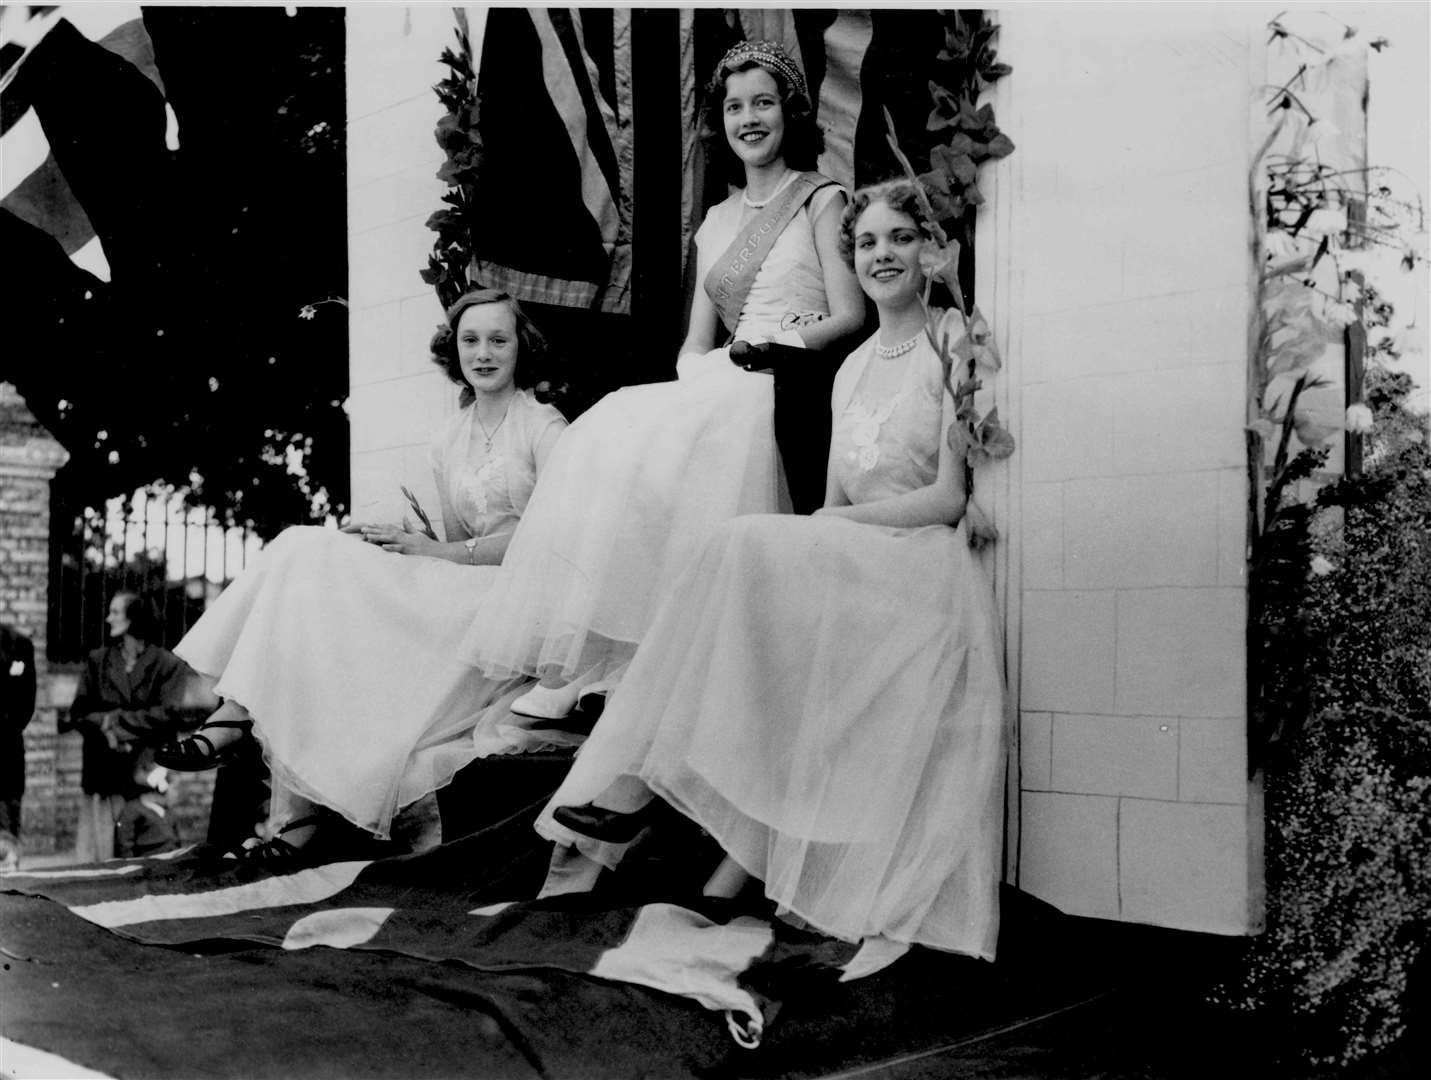 Miss Canterbury Pauline Groombridge on her carnival float with Maids of Honour Barbara Farrow, 16 and Shirley Mears, 16 - August 1954